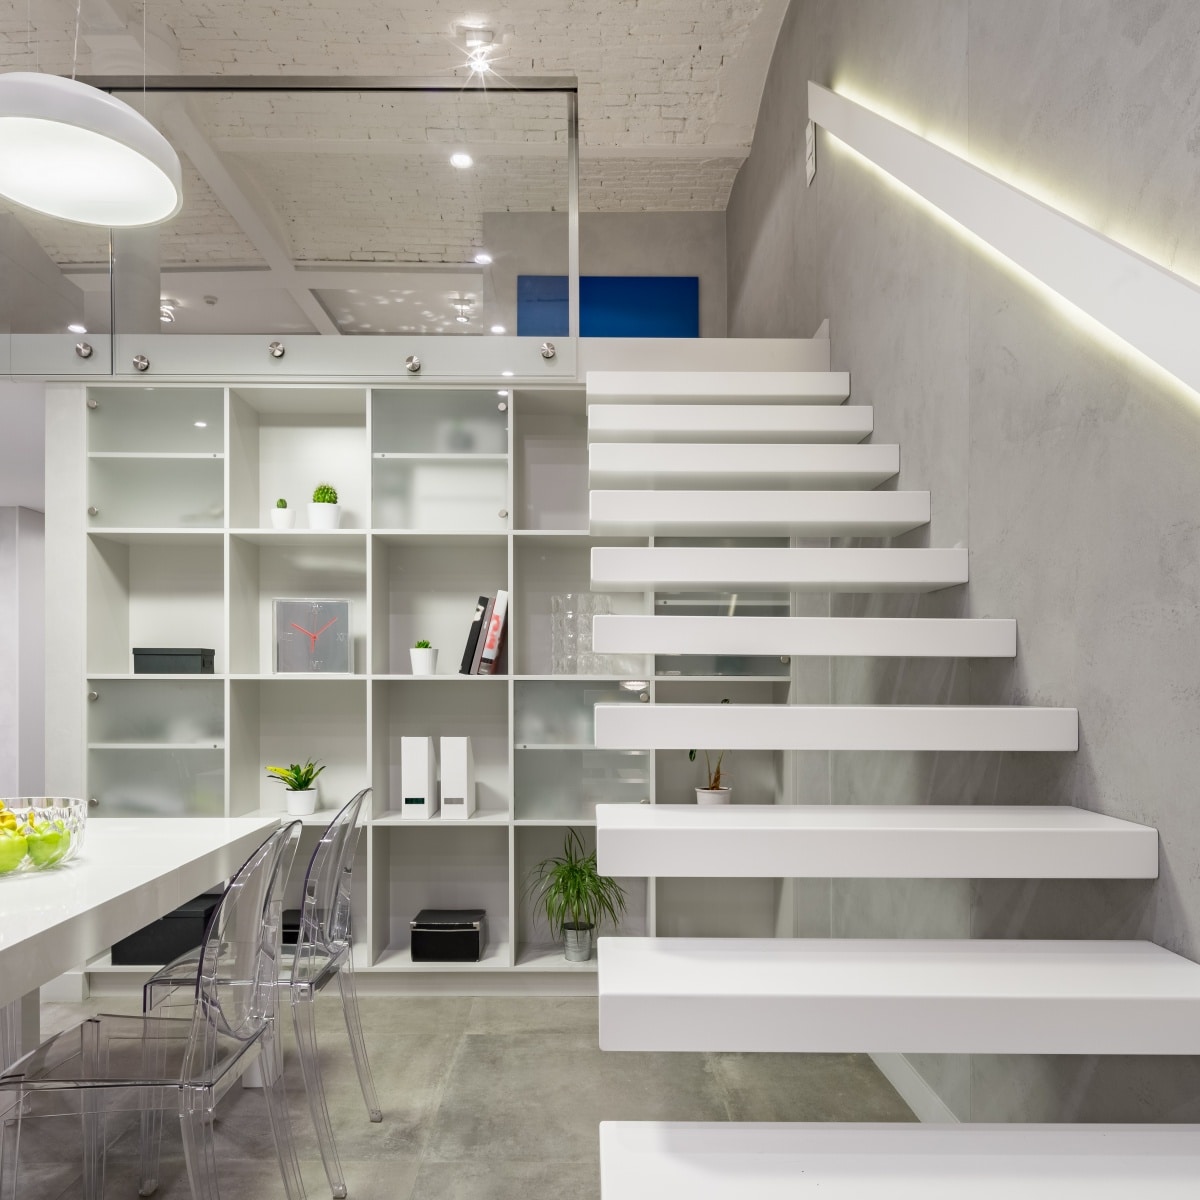 Loft apartment with white, modern, mezzanine stairs with led light in railing